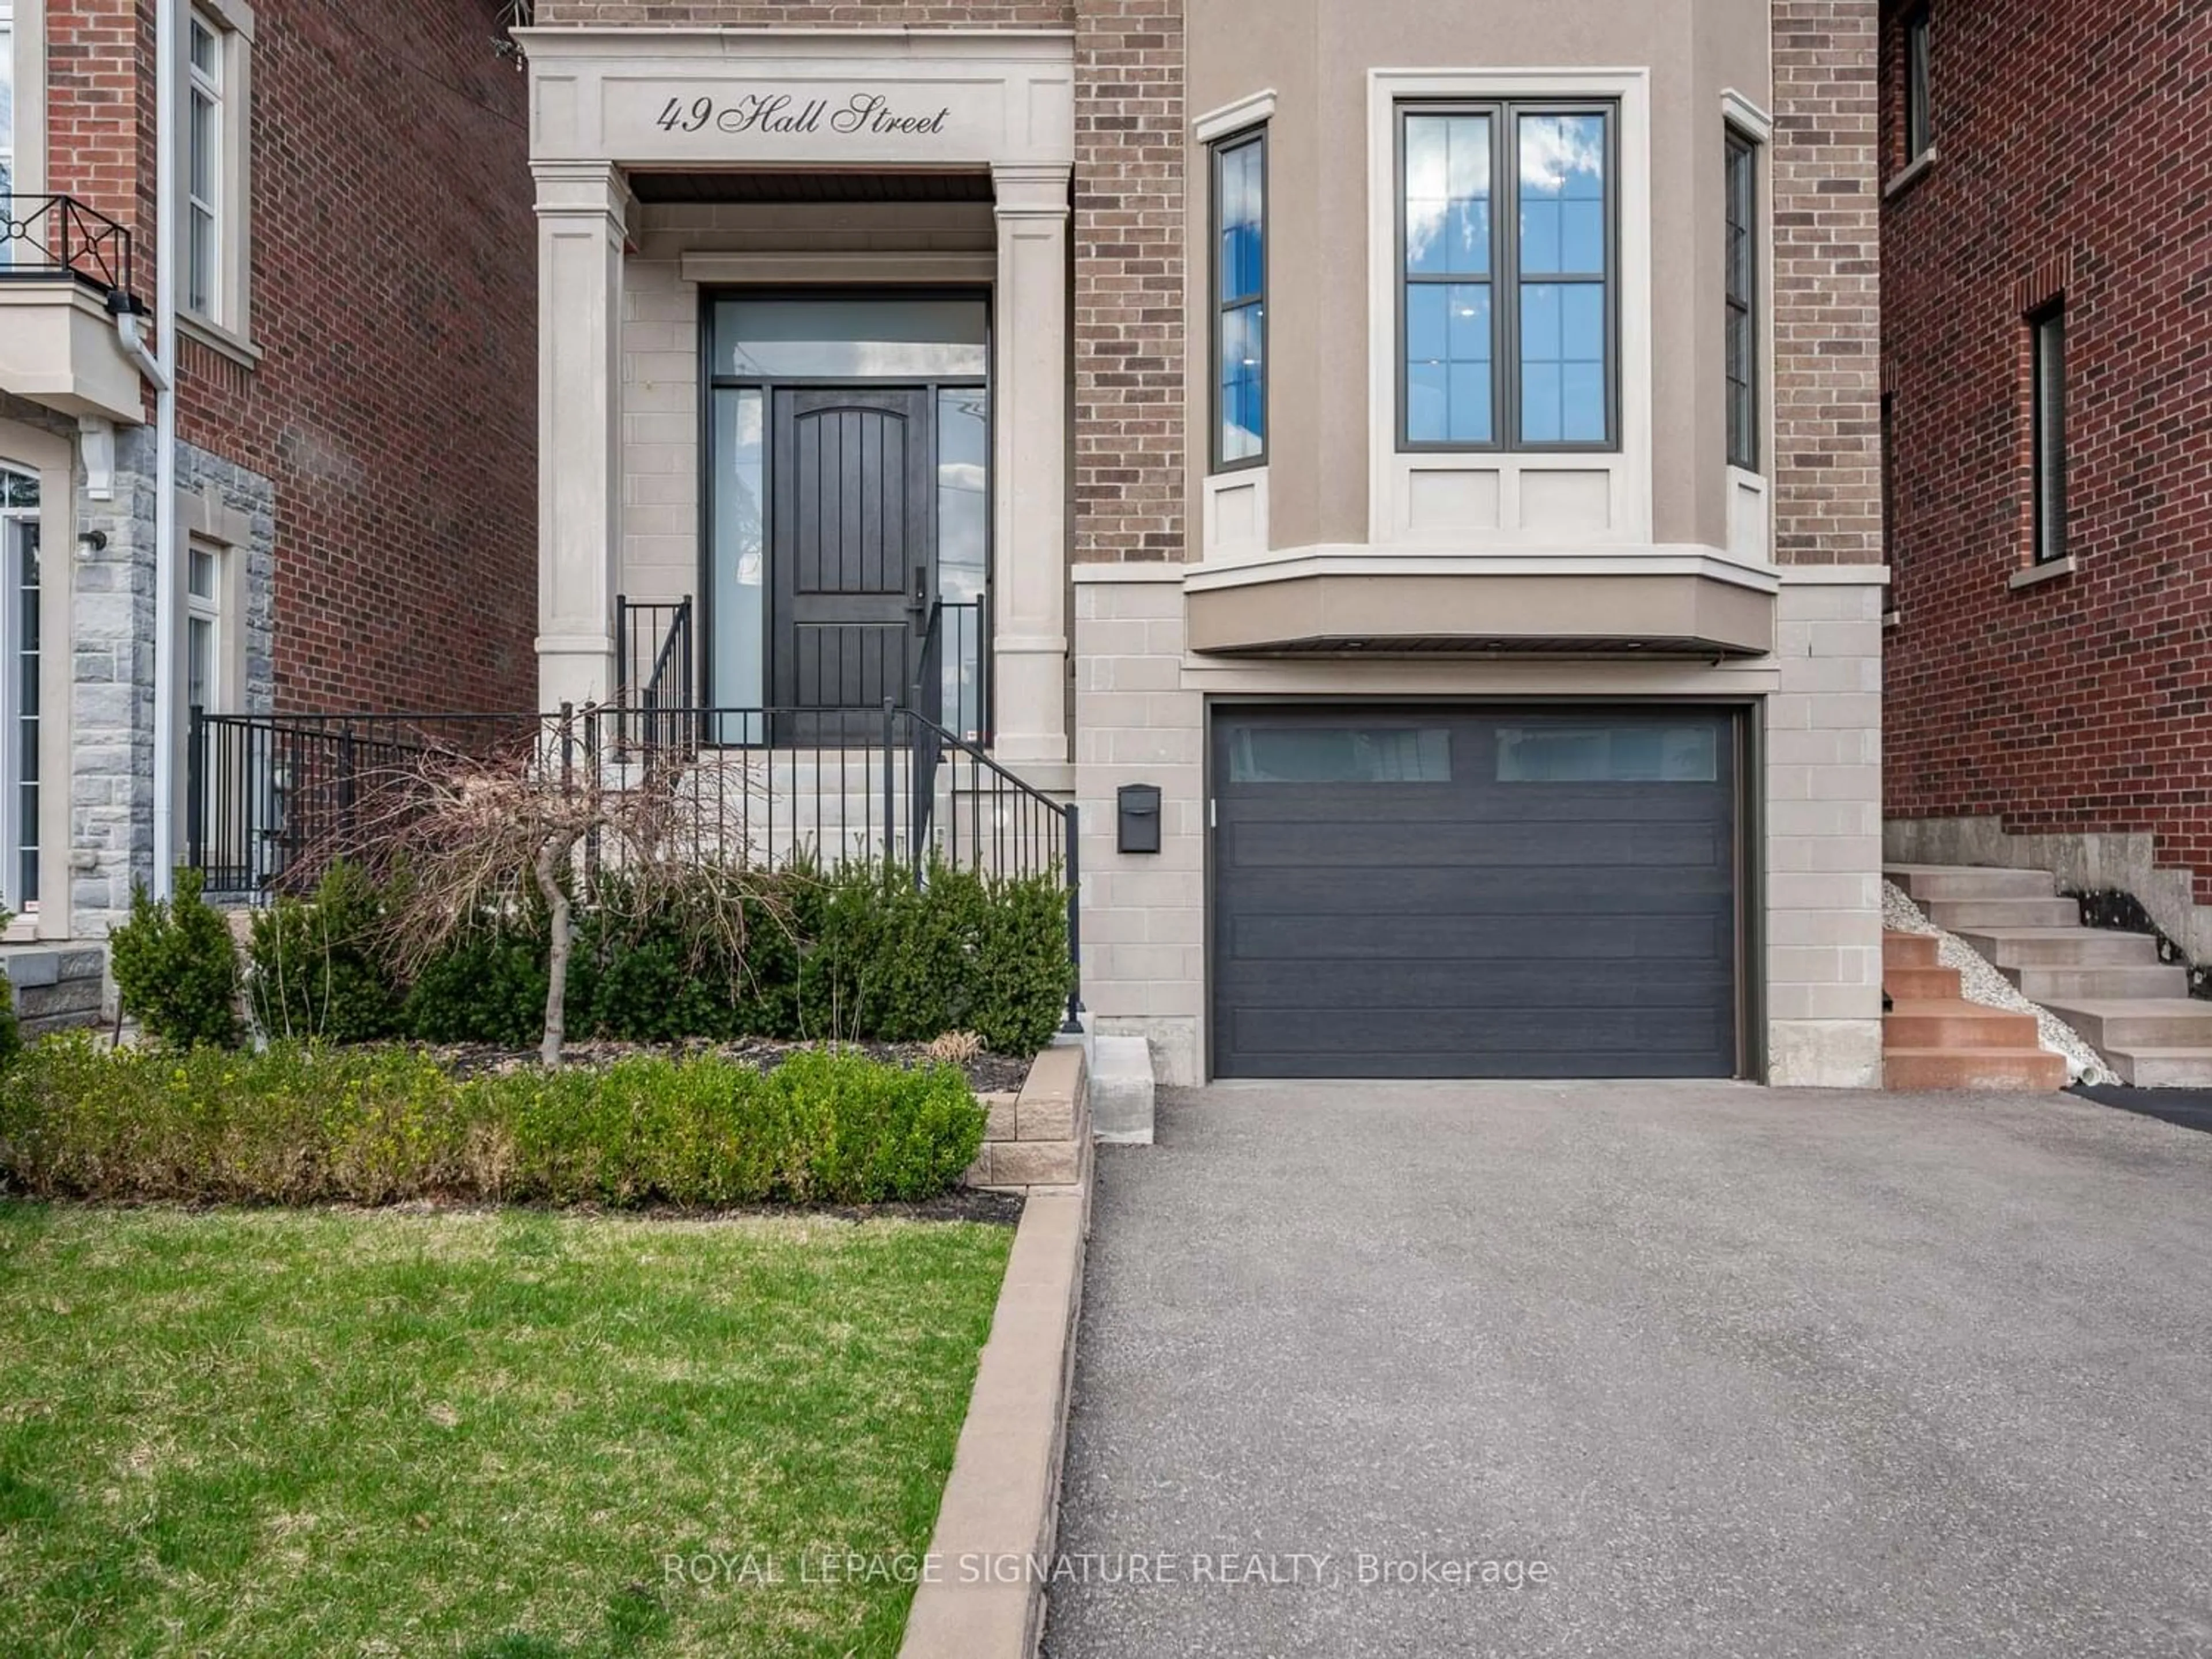 Home with brick exterior material for 49 Hall St, Richmond Hill Ontario L4C 4N7